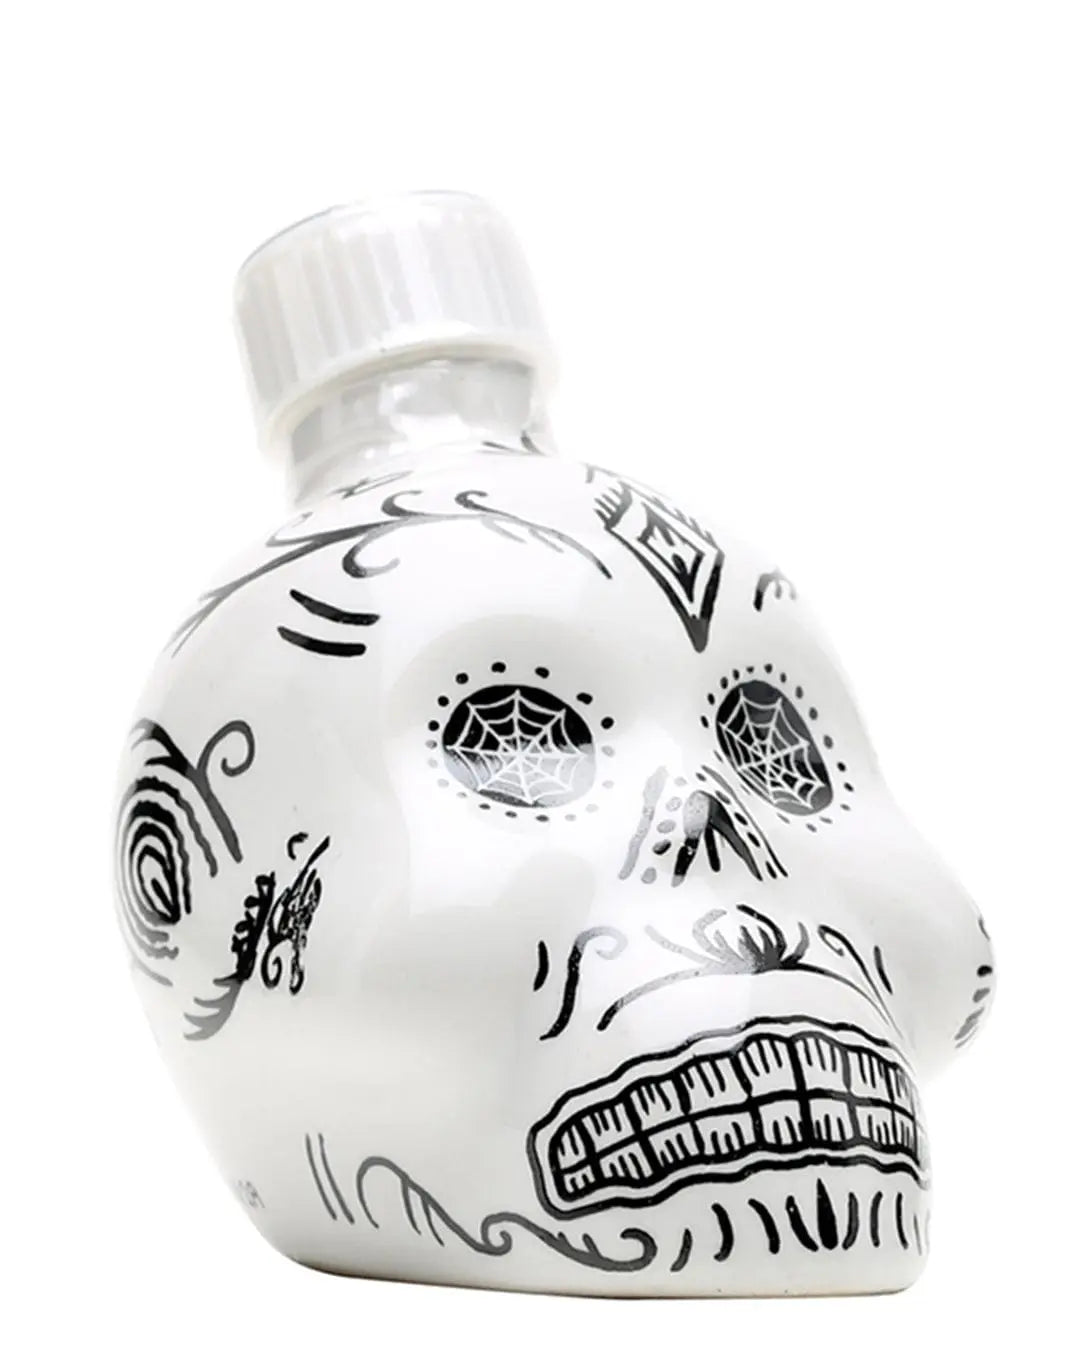 Buy KAH Tequila Blanco Mini online at The Bottle Club